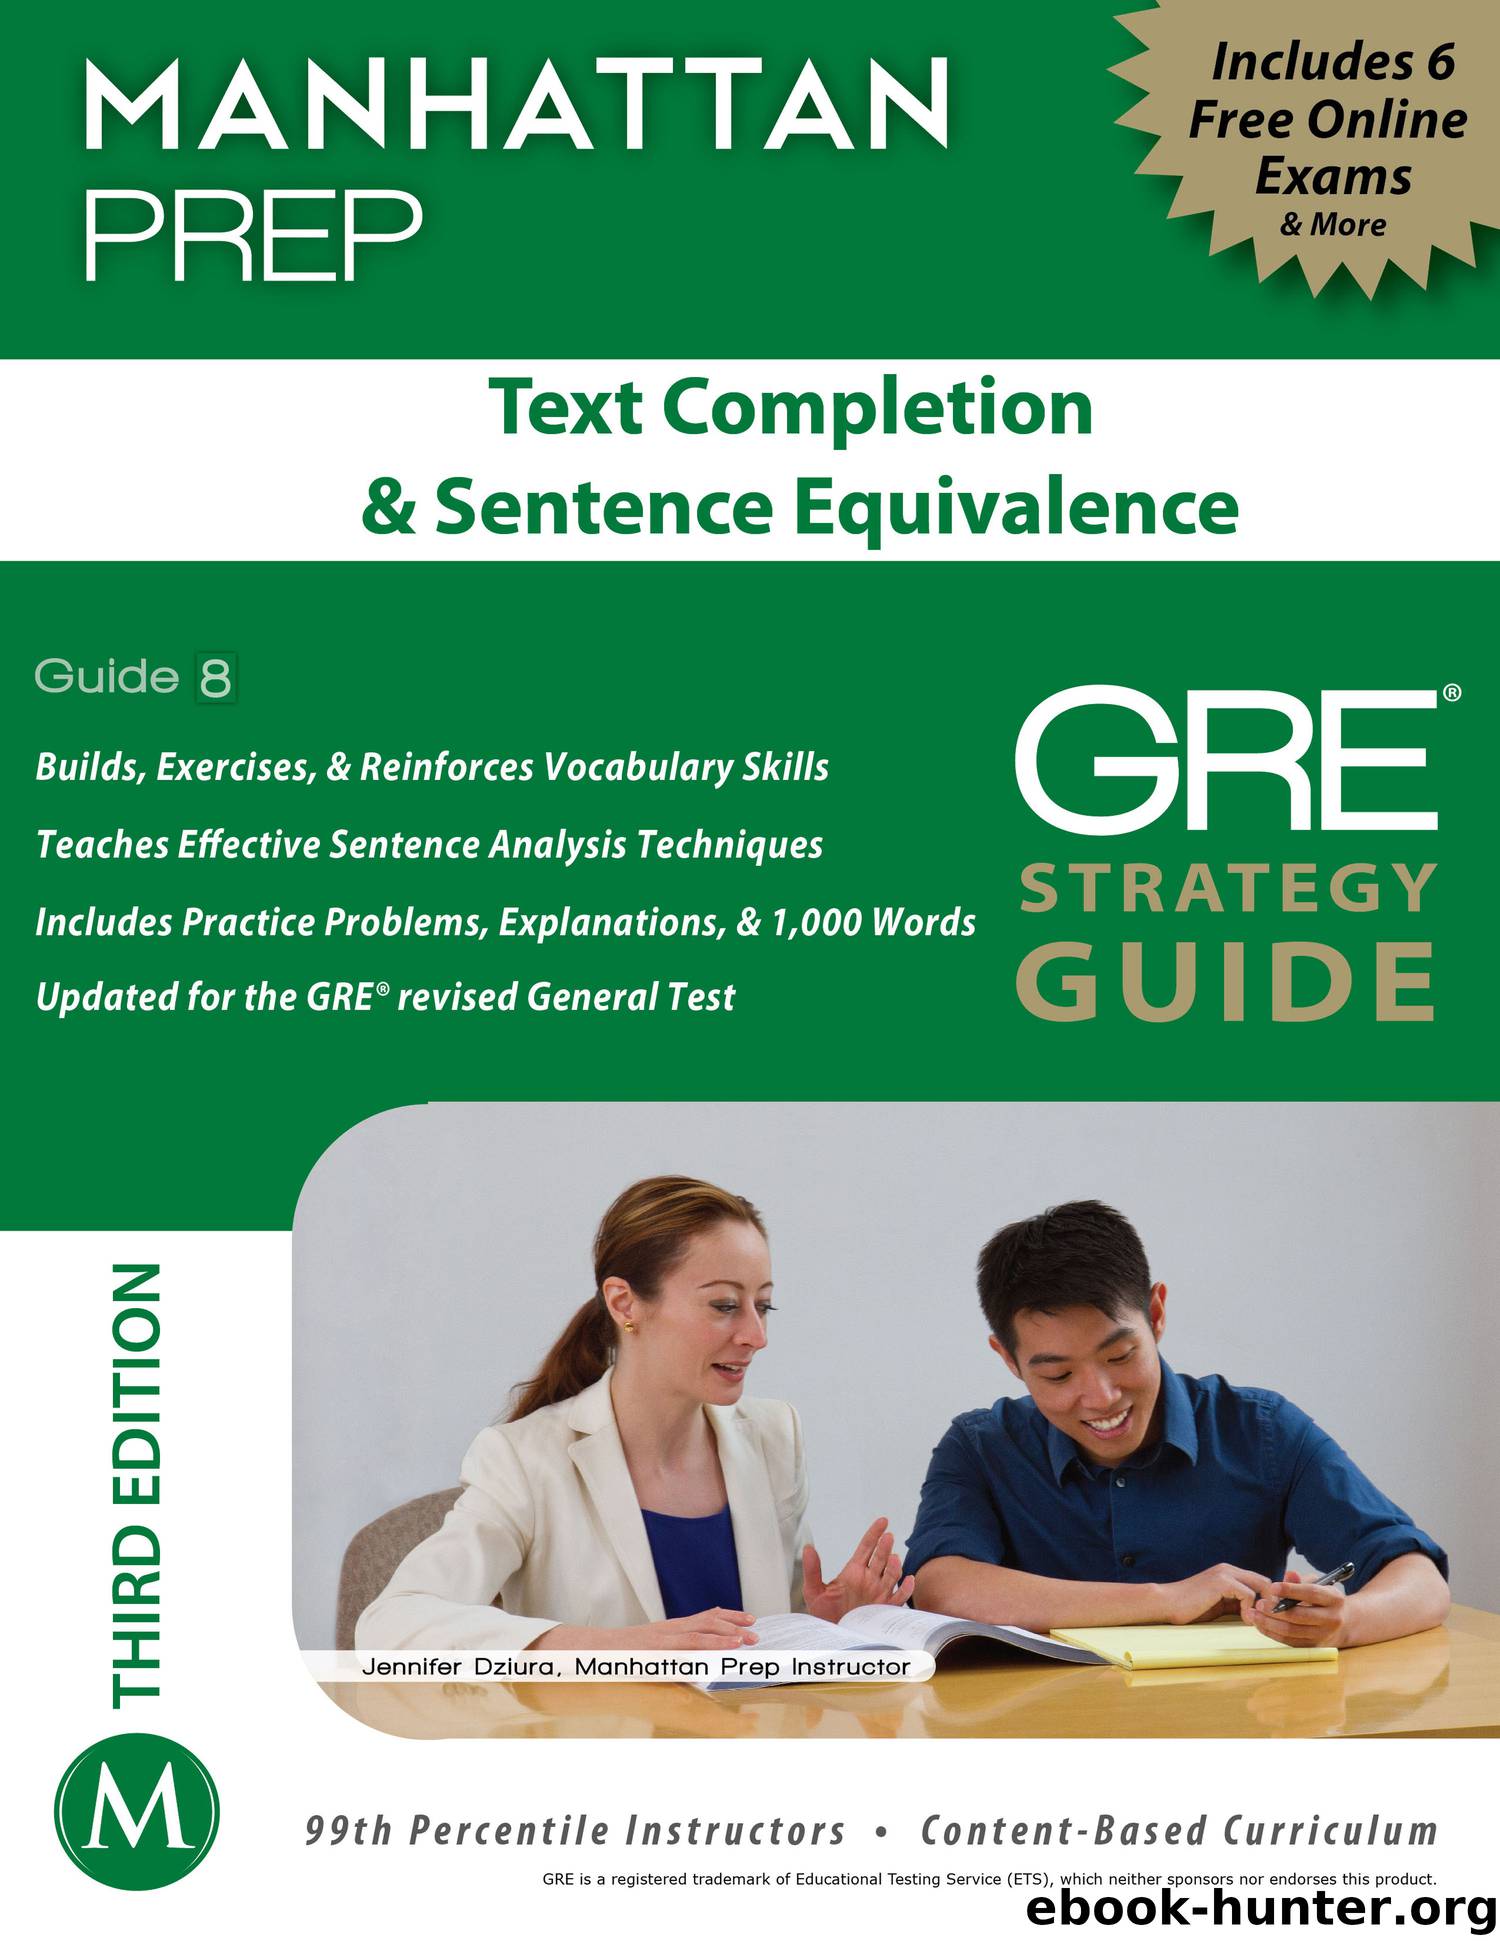 Text Completion & Sentence Equivalence GRE Strategy Guide by Manhattan Prep